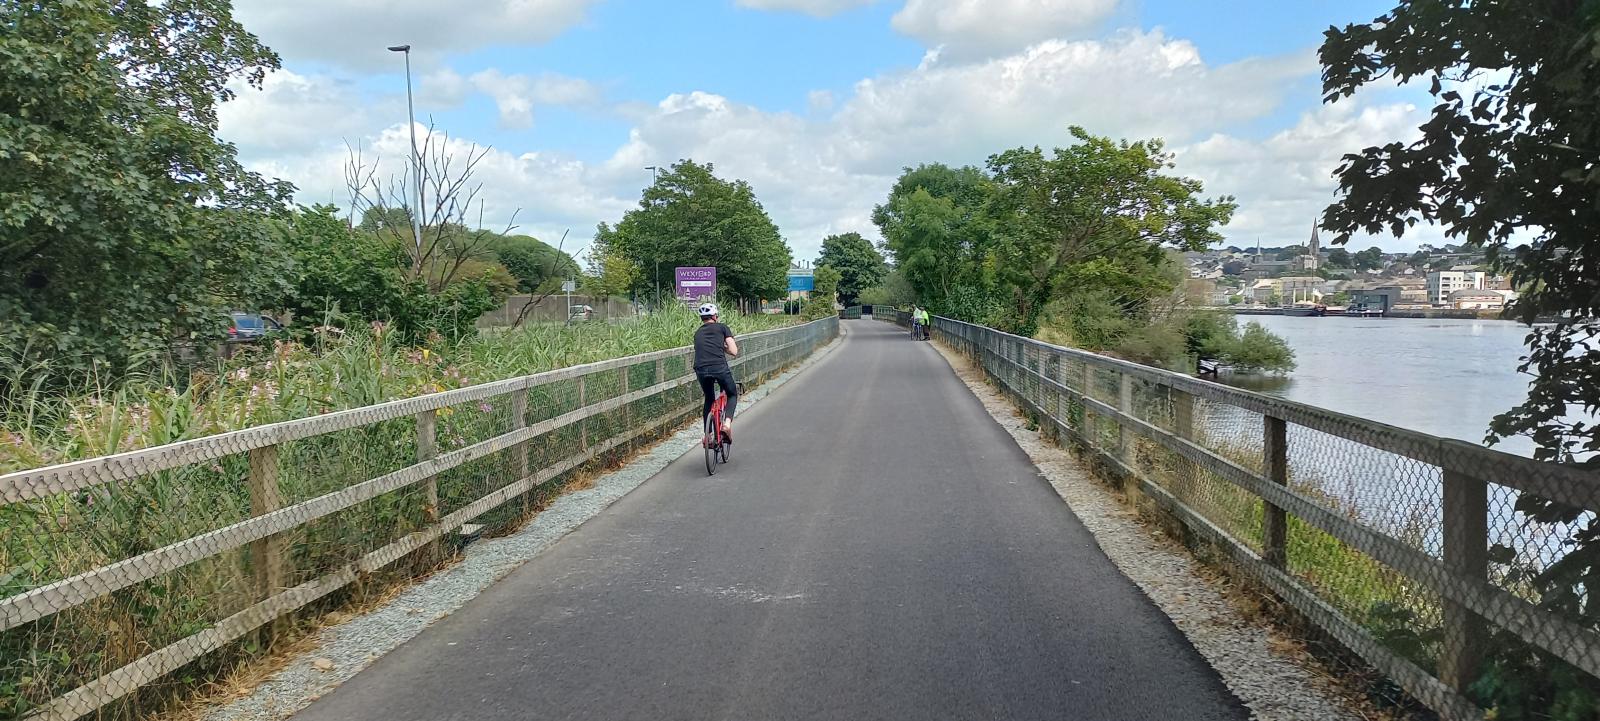 Cyclist on South East Greenway - Image 1